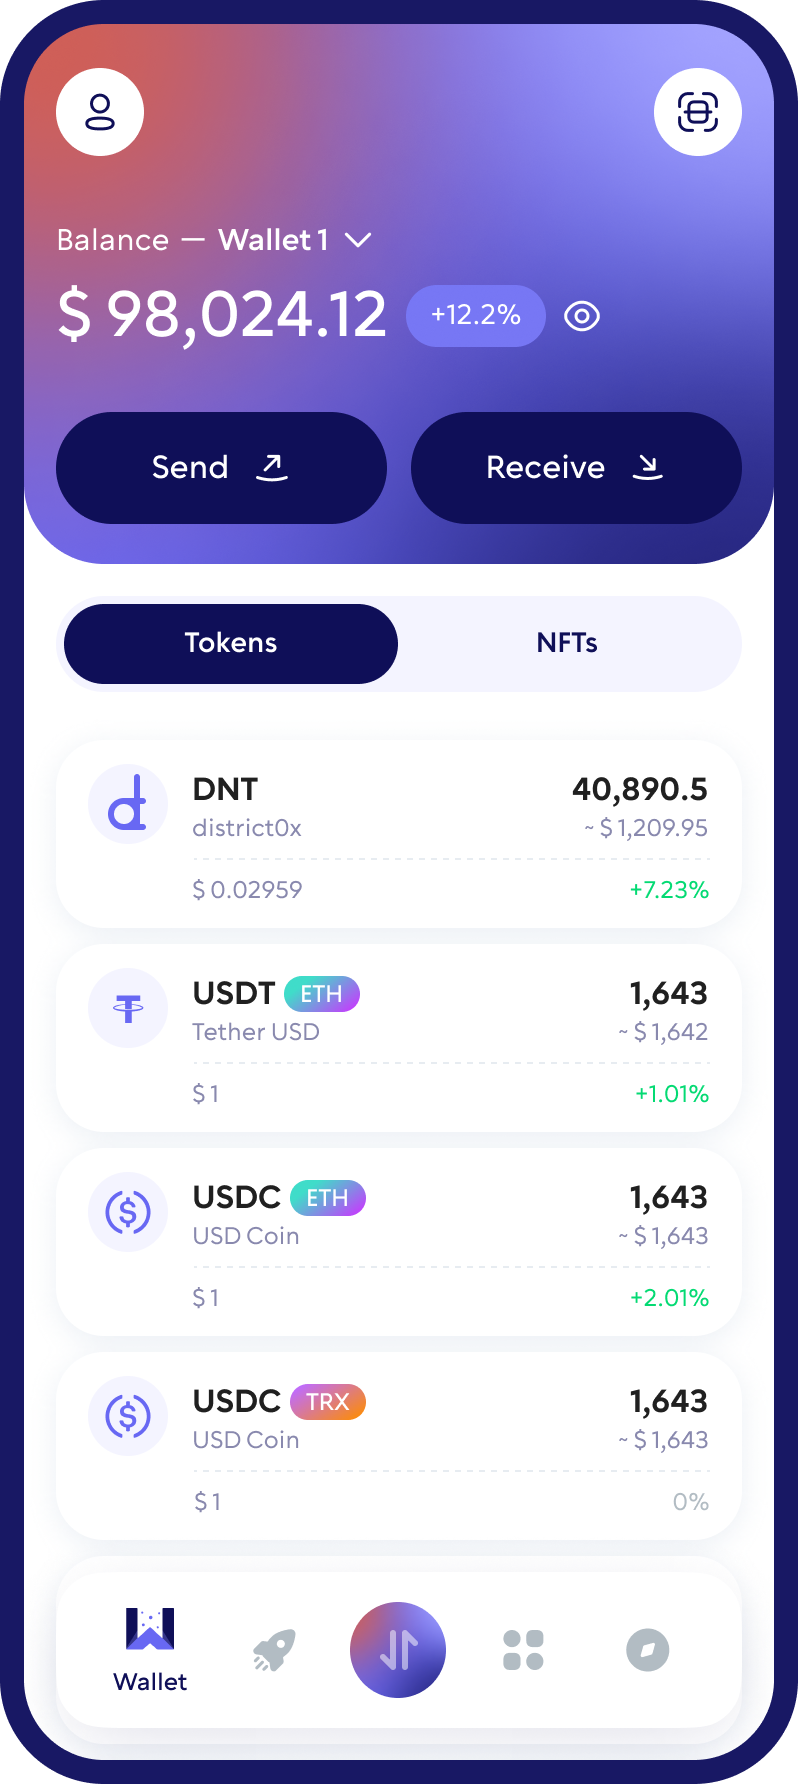 District0x (DNT) Cryptocurrency Wallet Walletverse